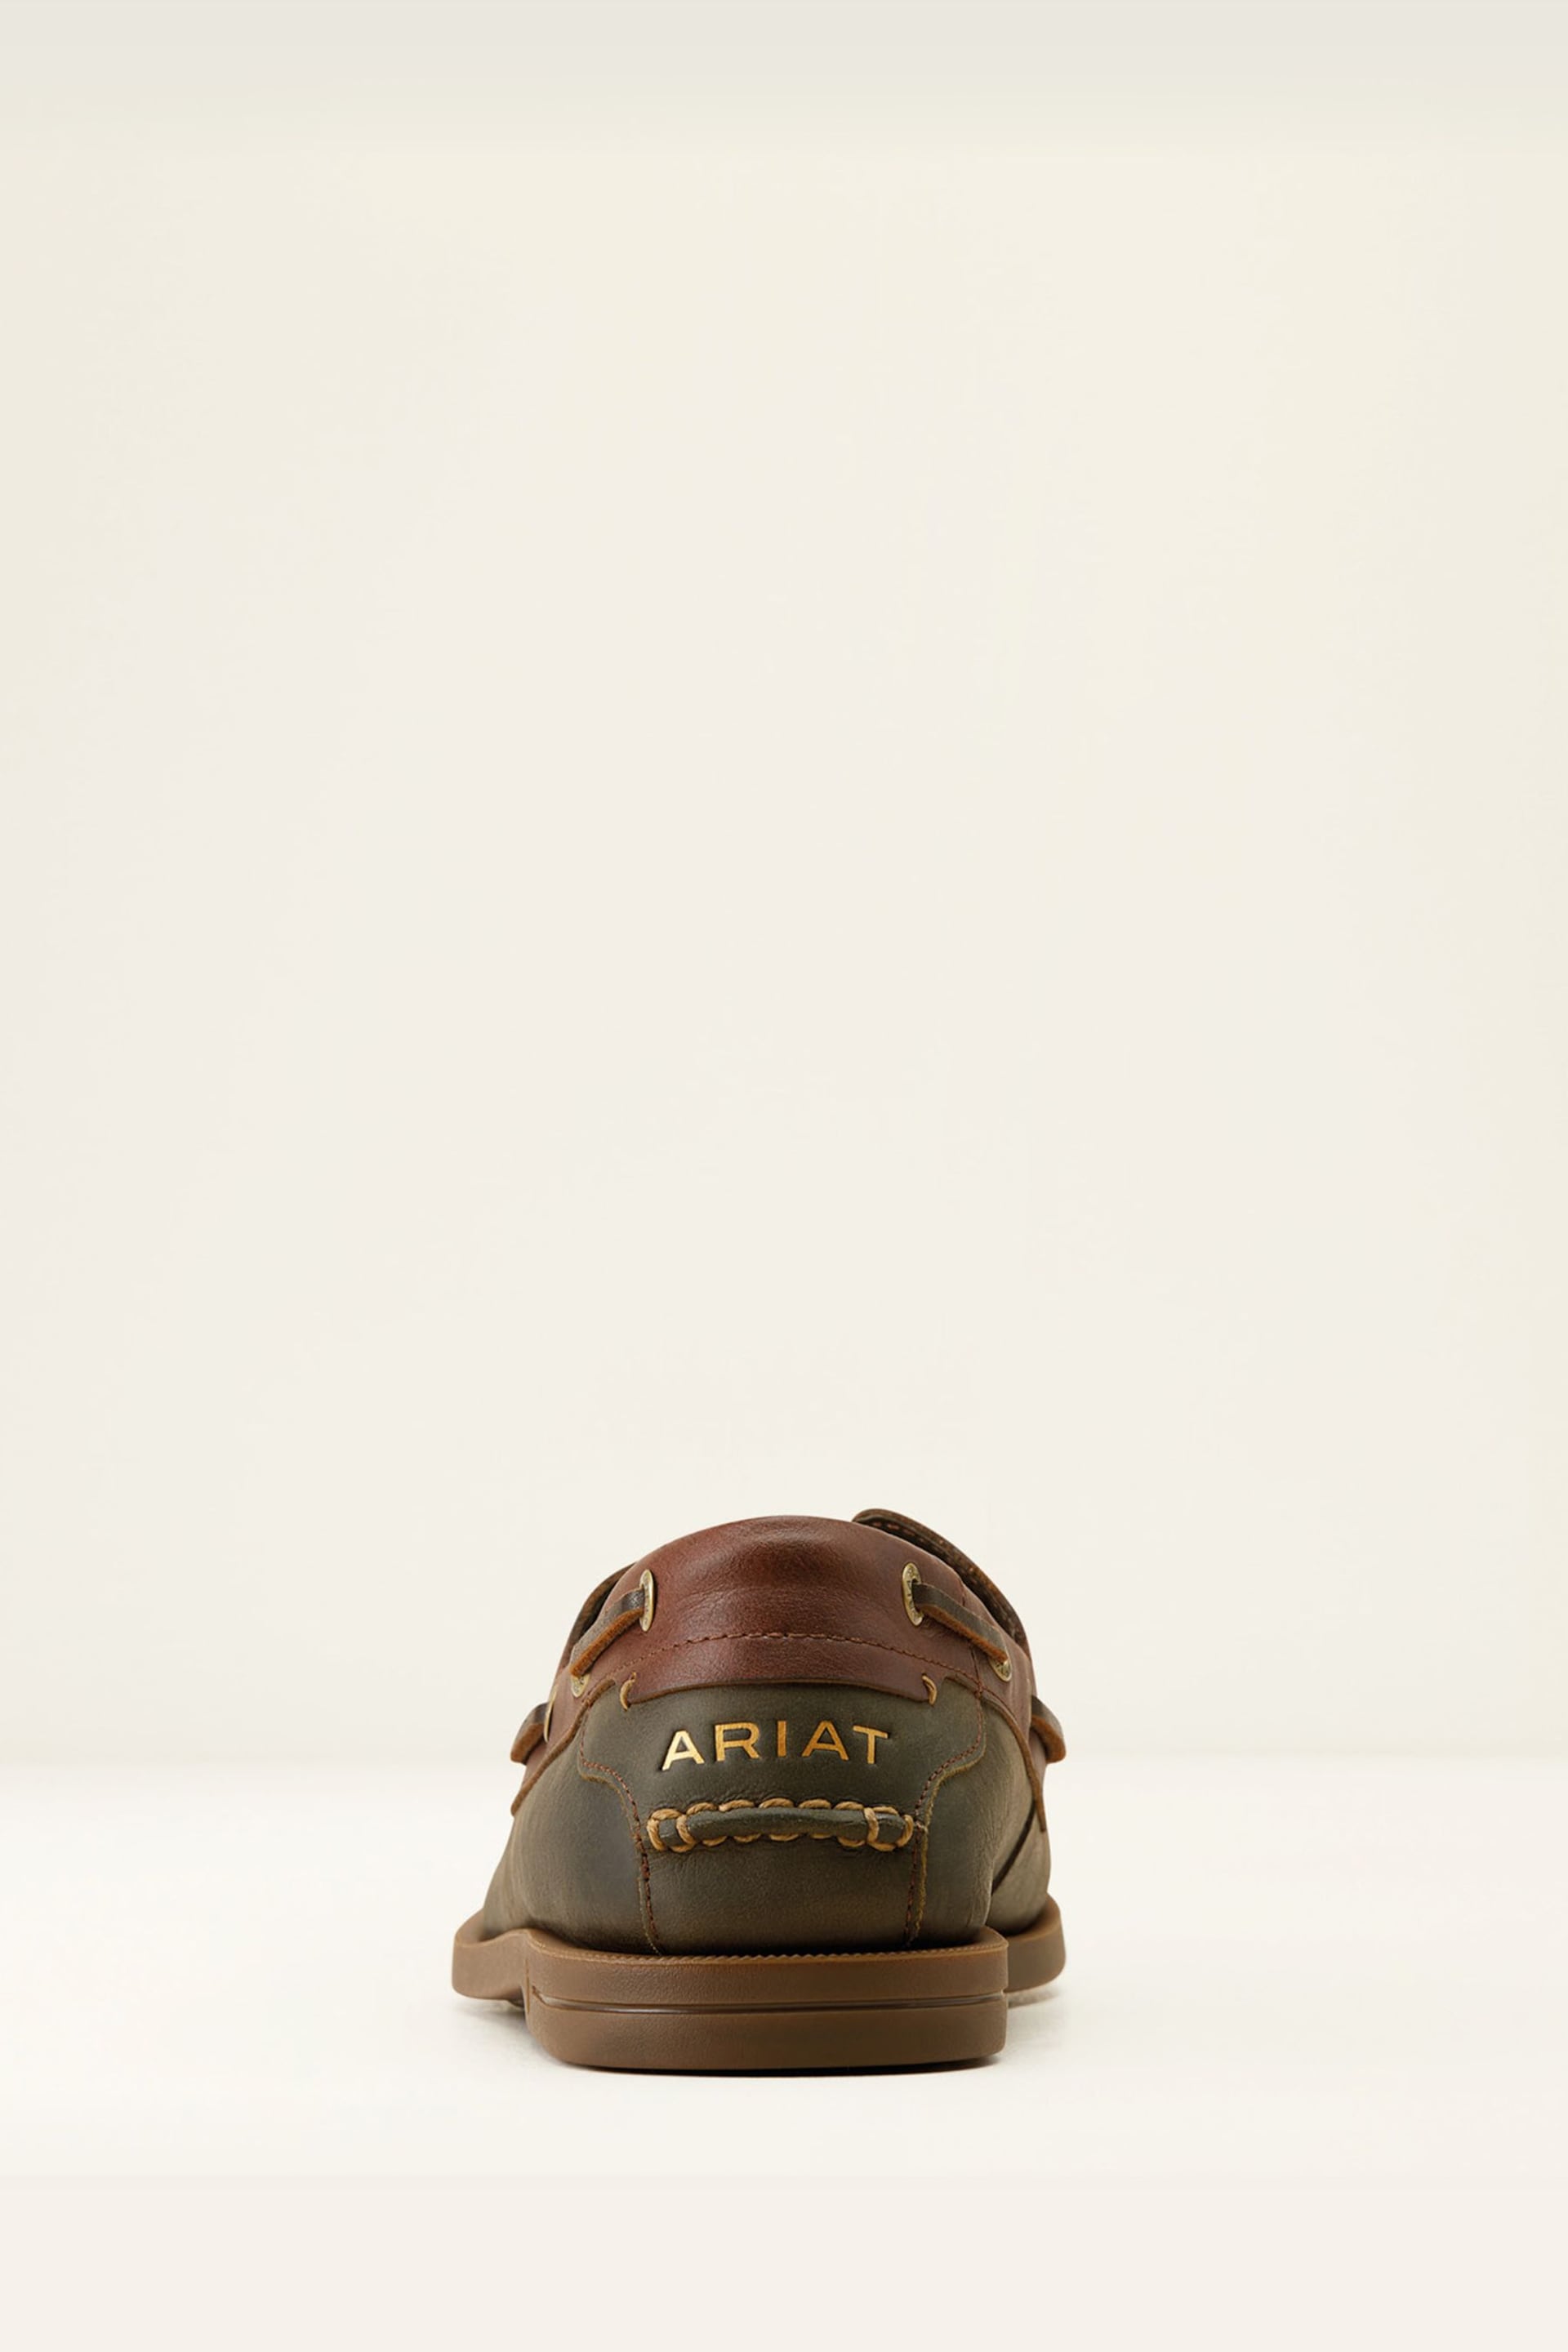 Ariat Green Antigua Boat Shoes - Image 3 of 4